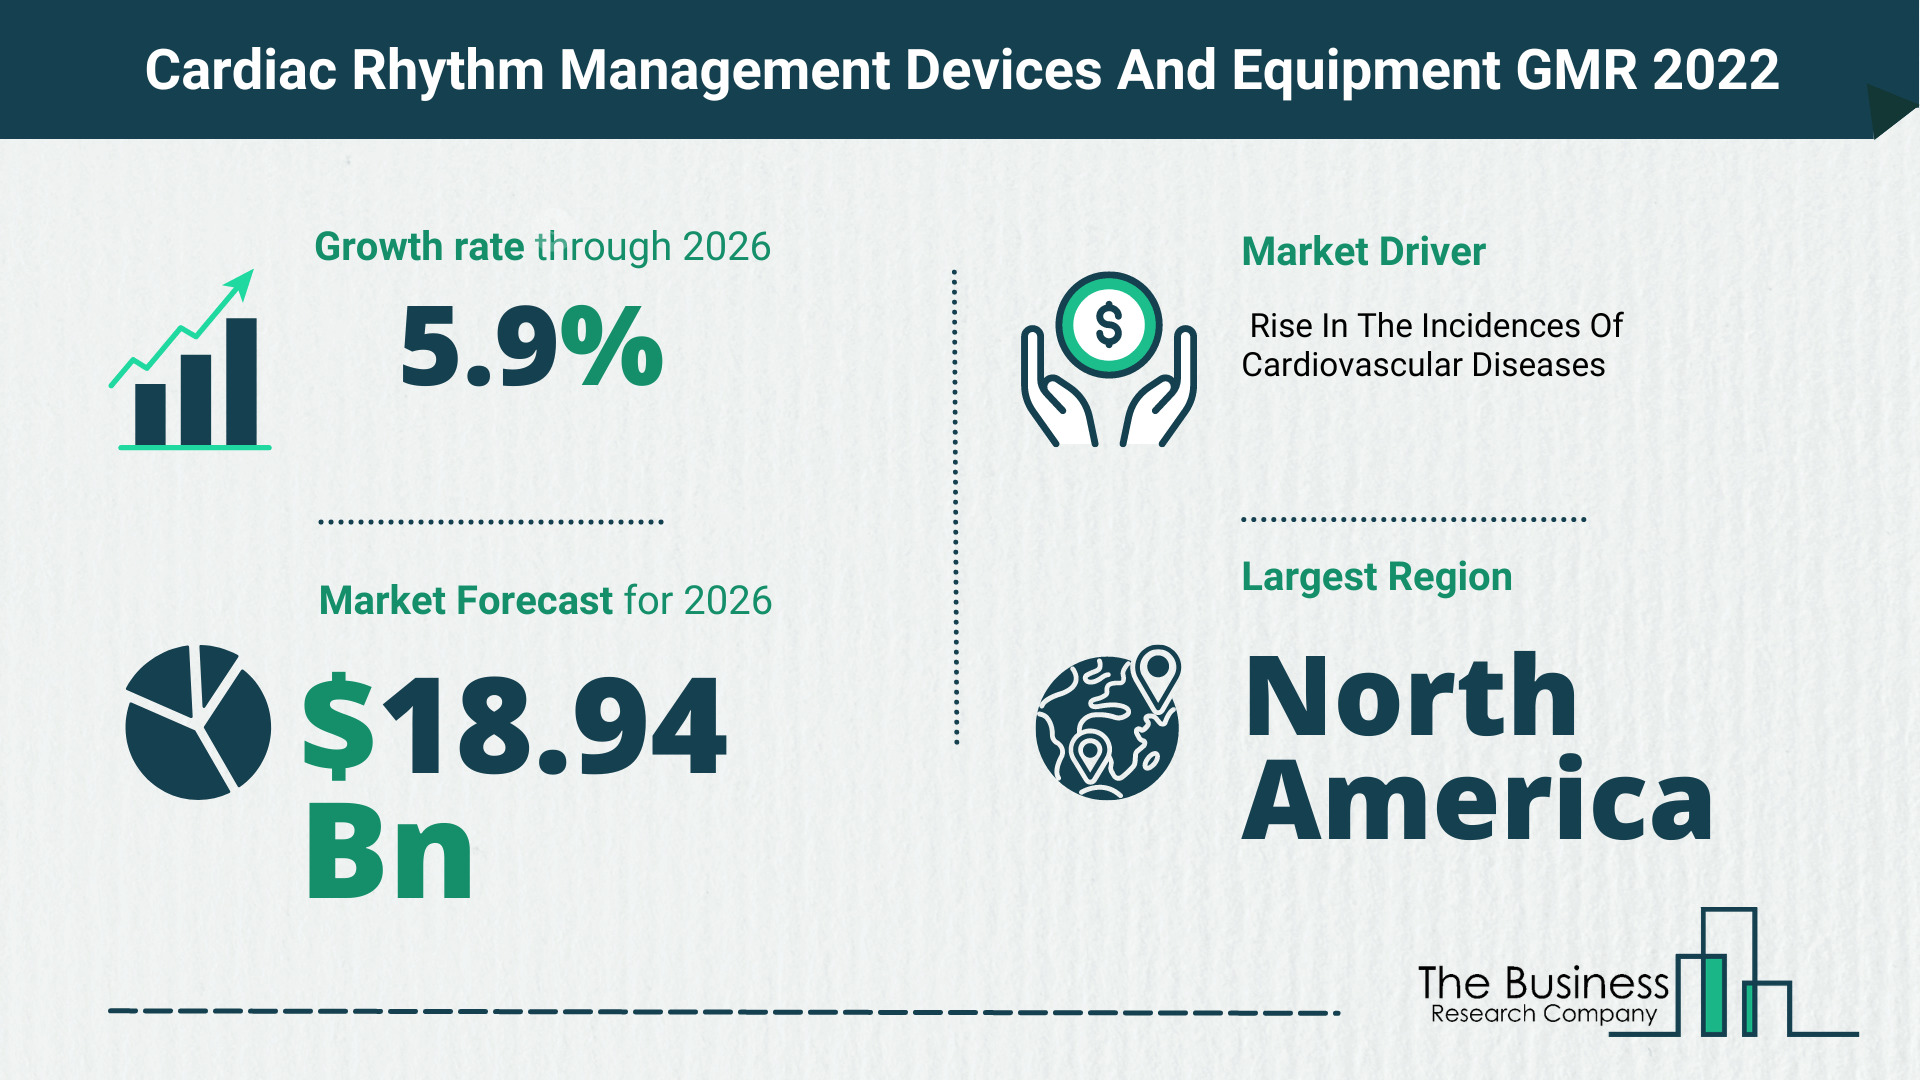 Latest Cardiac Rhythm Management (CRM) Devices And Equipment Market Growth Study 2022-2026 By The Business Research Company